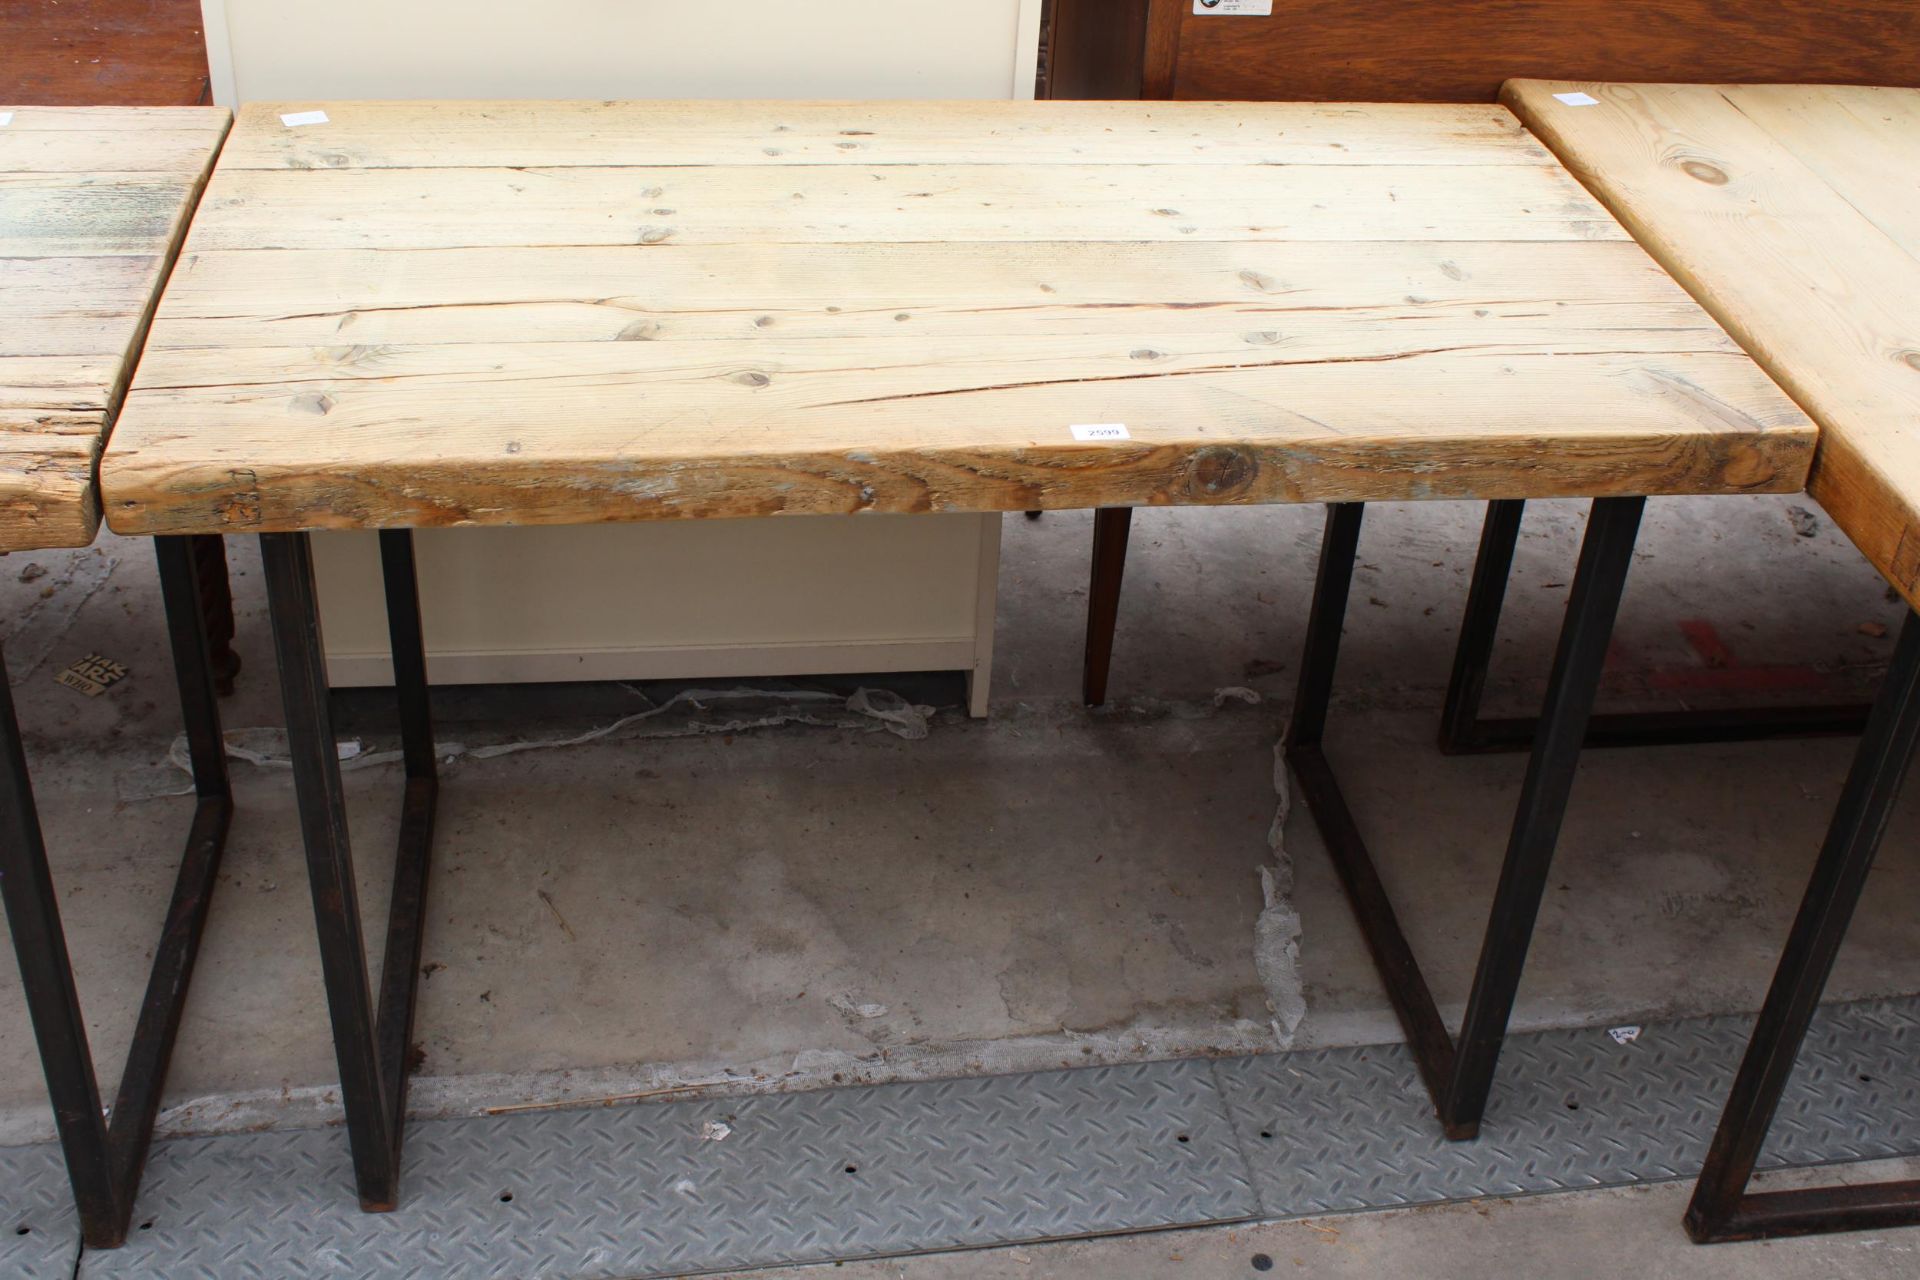 A RUSTIC FOUR PLANK TABLE, 47" X 27" ON METAL LEGS